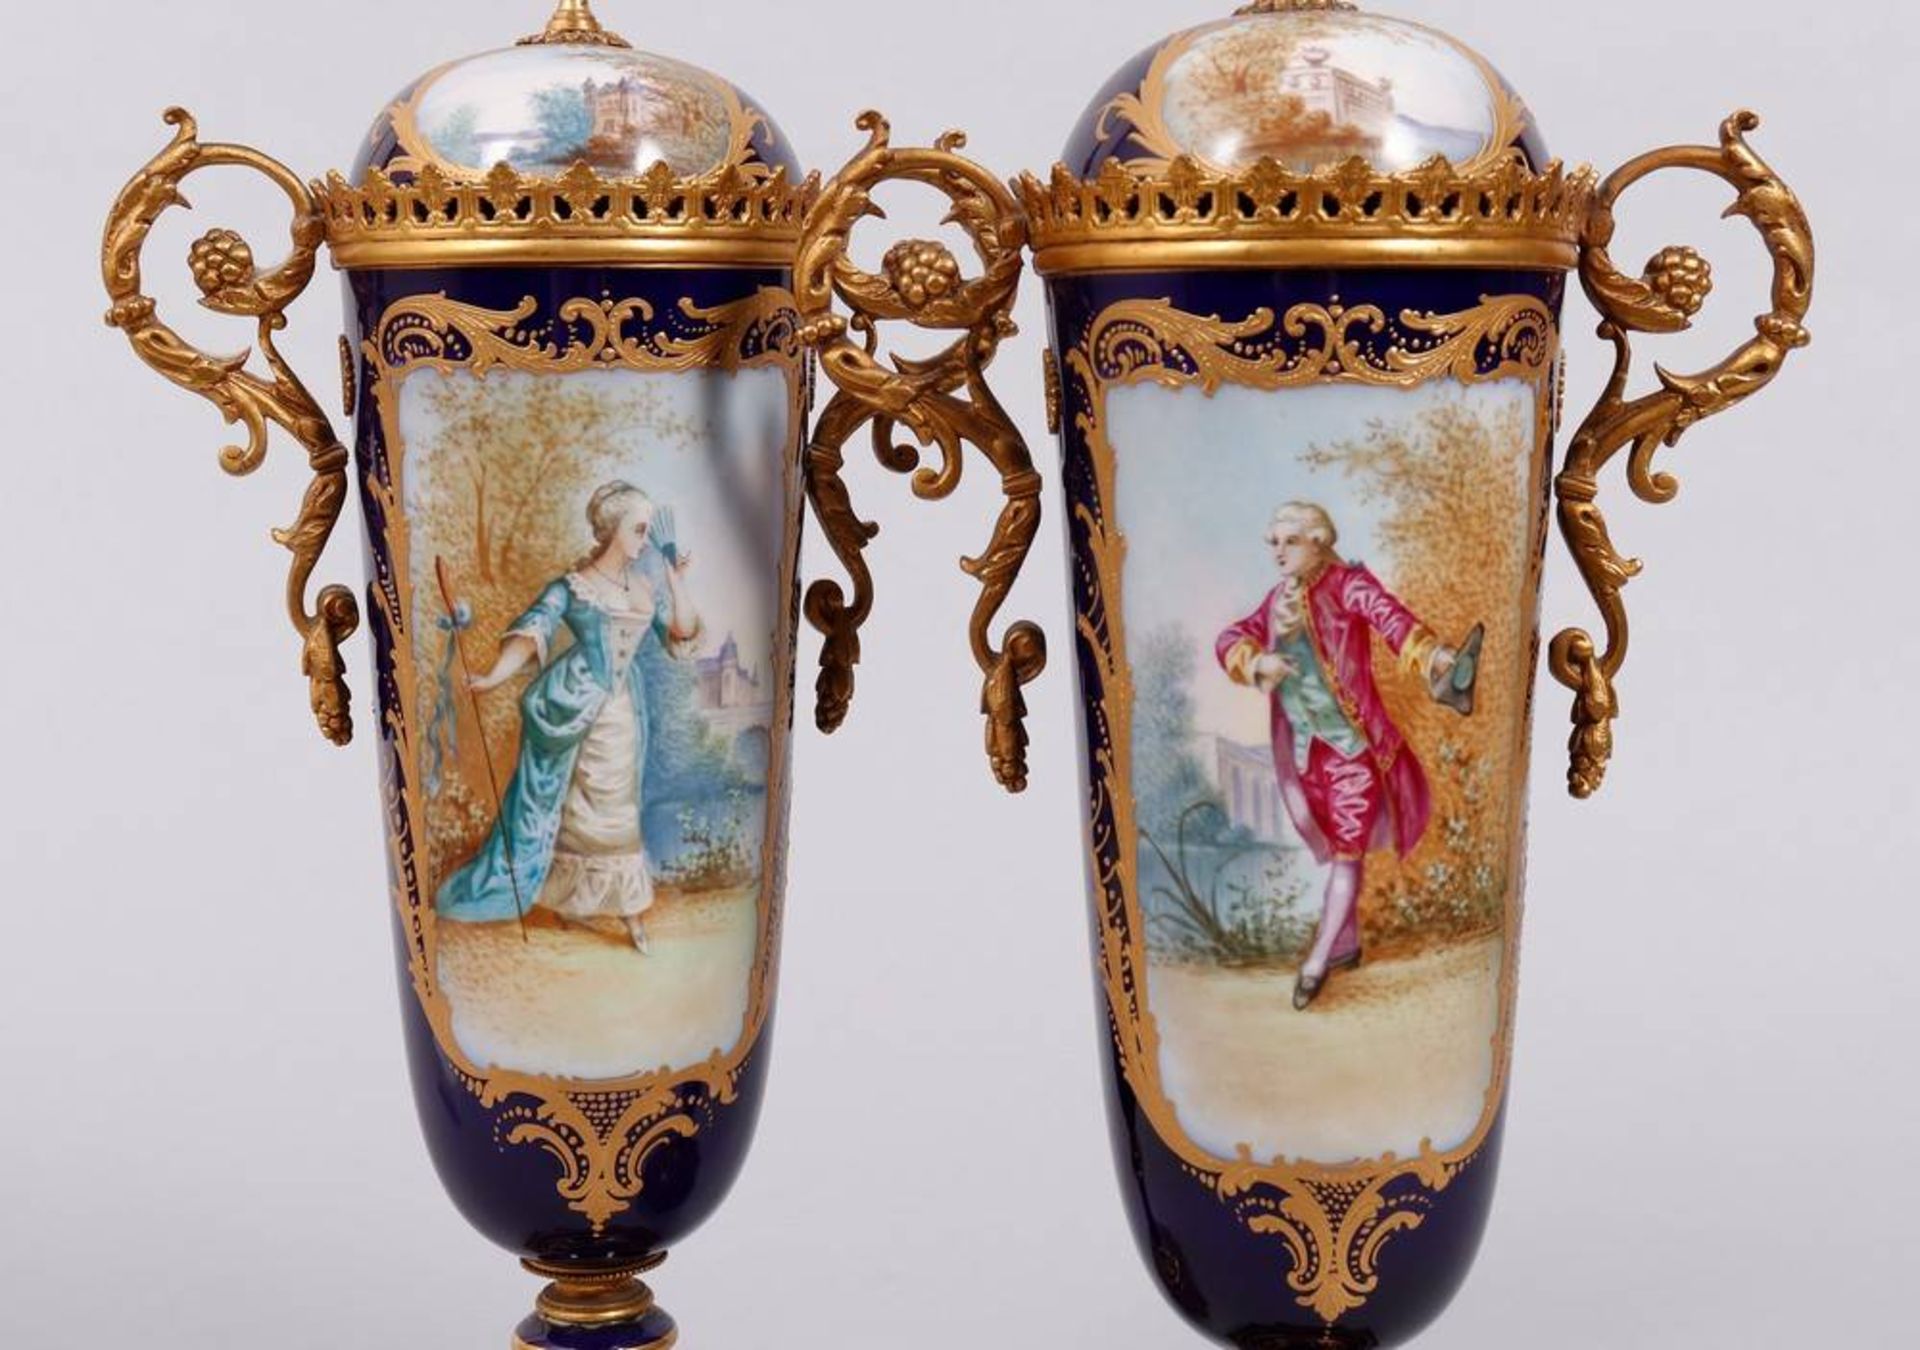 Pair of lidded vases, Chateau des Tuileries, Sèvres, around 1840 - Image 2 of 15